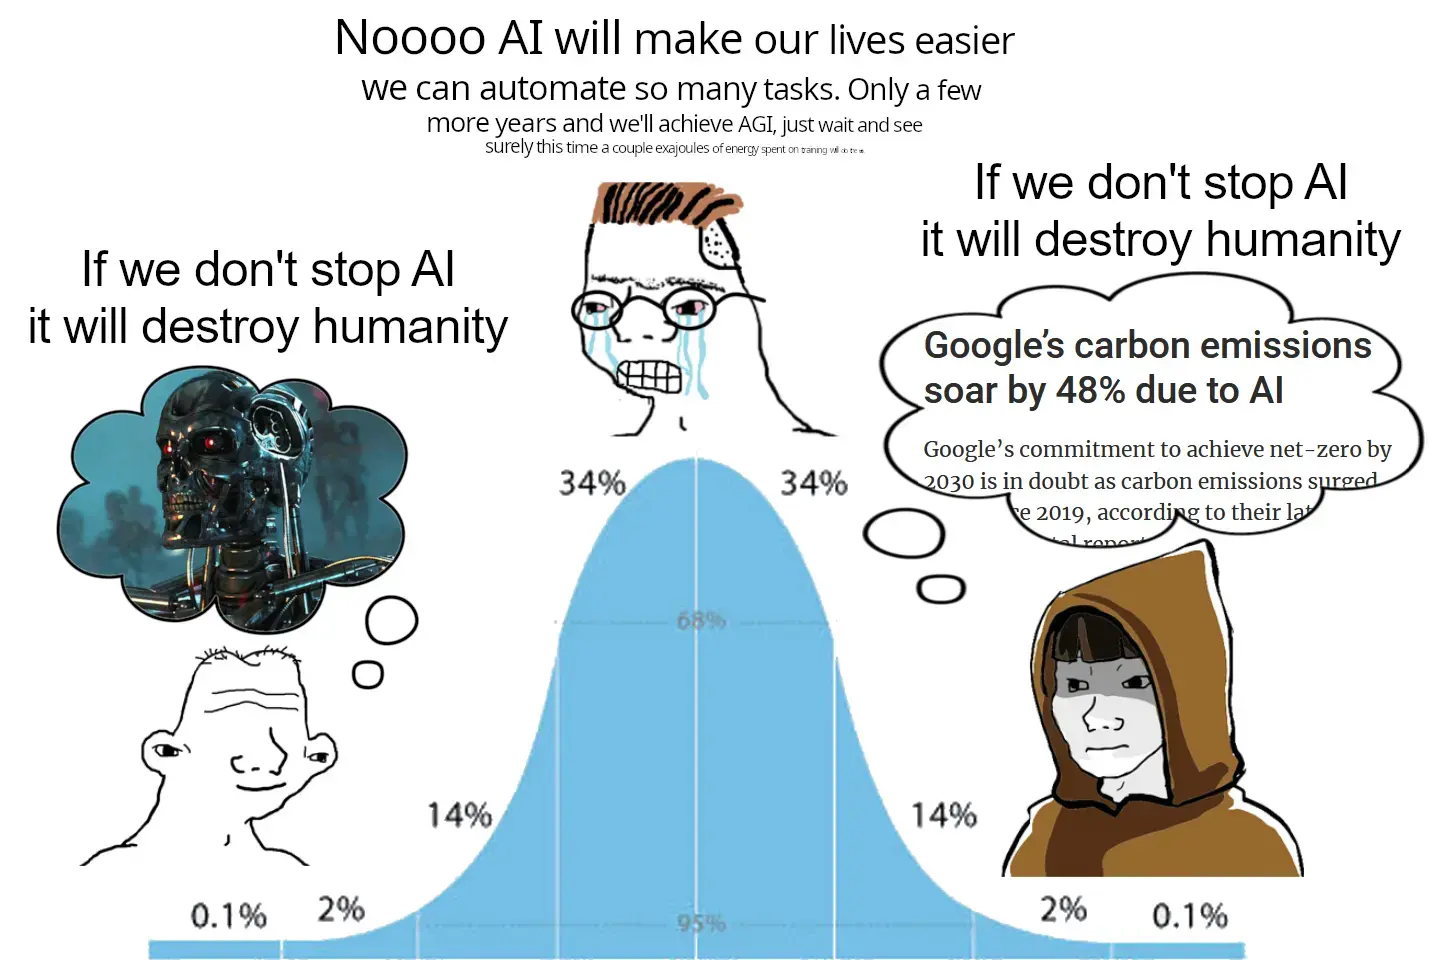 A meme in the "IQ bell curve" format. On the left, stupid wojak says "If we don't stop AI, it will destroy humanity", while thinking about rogue robots from Terminator. On the right, sage wojak also says "If we don't stop AI, it will destroy humanity", but he's thinking about massive energy requirements and carbon emissions associated with AI. In the middle, average intelligence wojak is in favour of AI: "Noooo AI will make our lives easier, we can automate so many tasks. Only a few more years and we'll achieve AGI, just wait and see. Surely this time a couple exajoules of energy spent on training will do the trick."